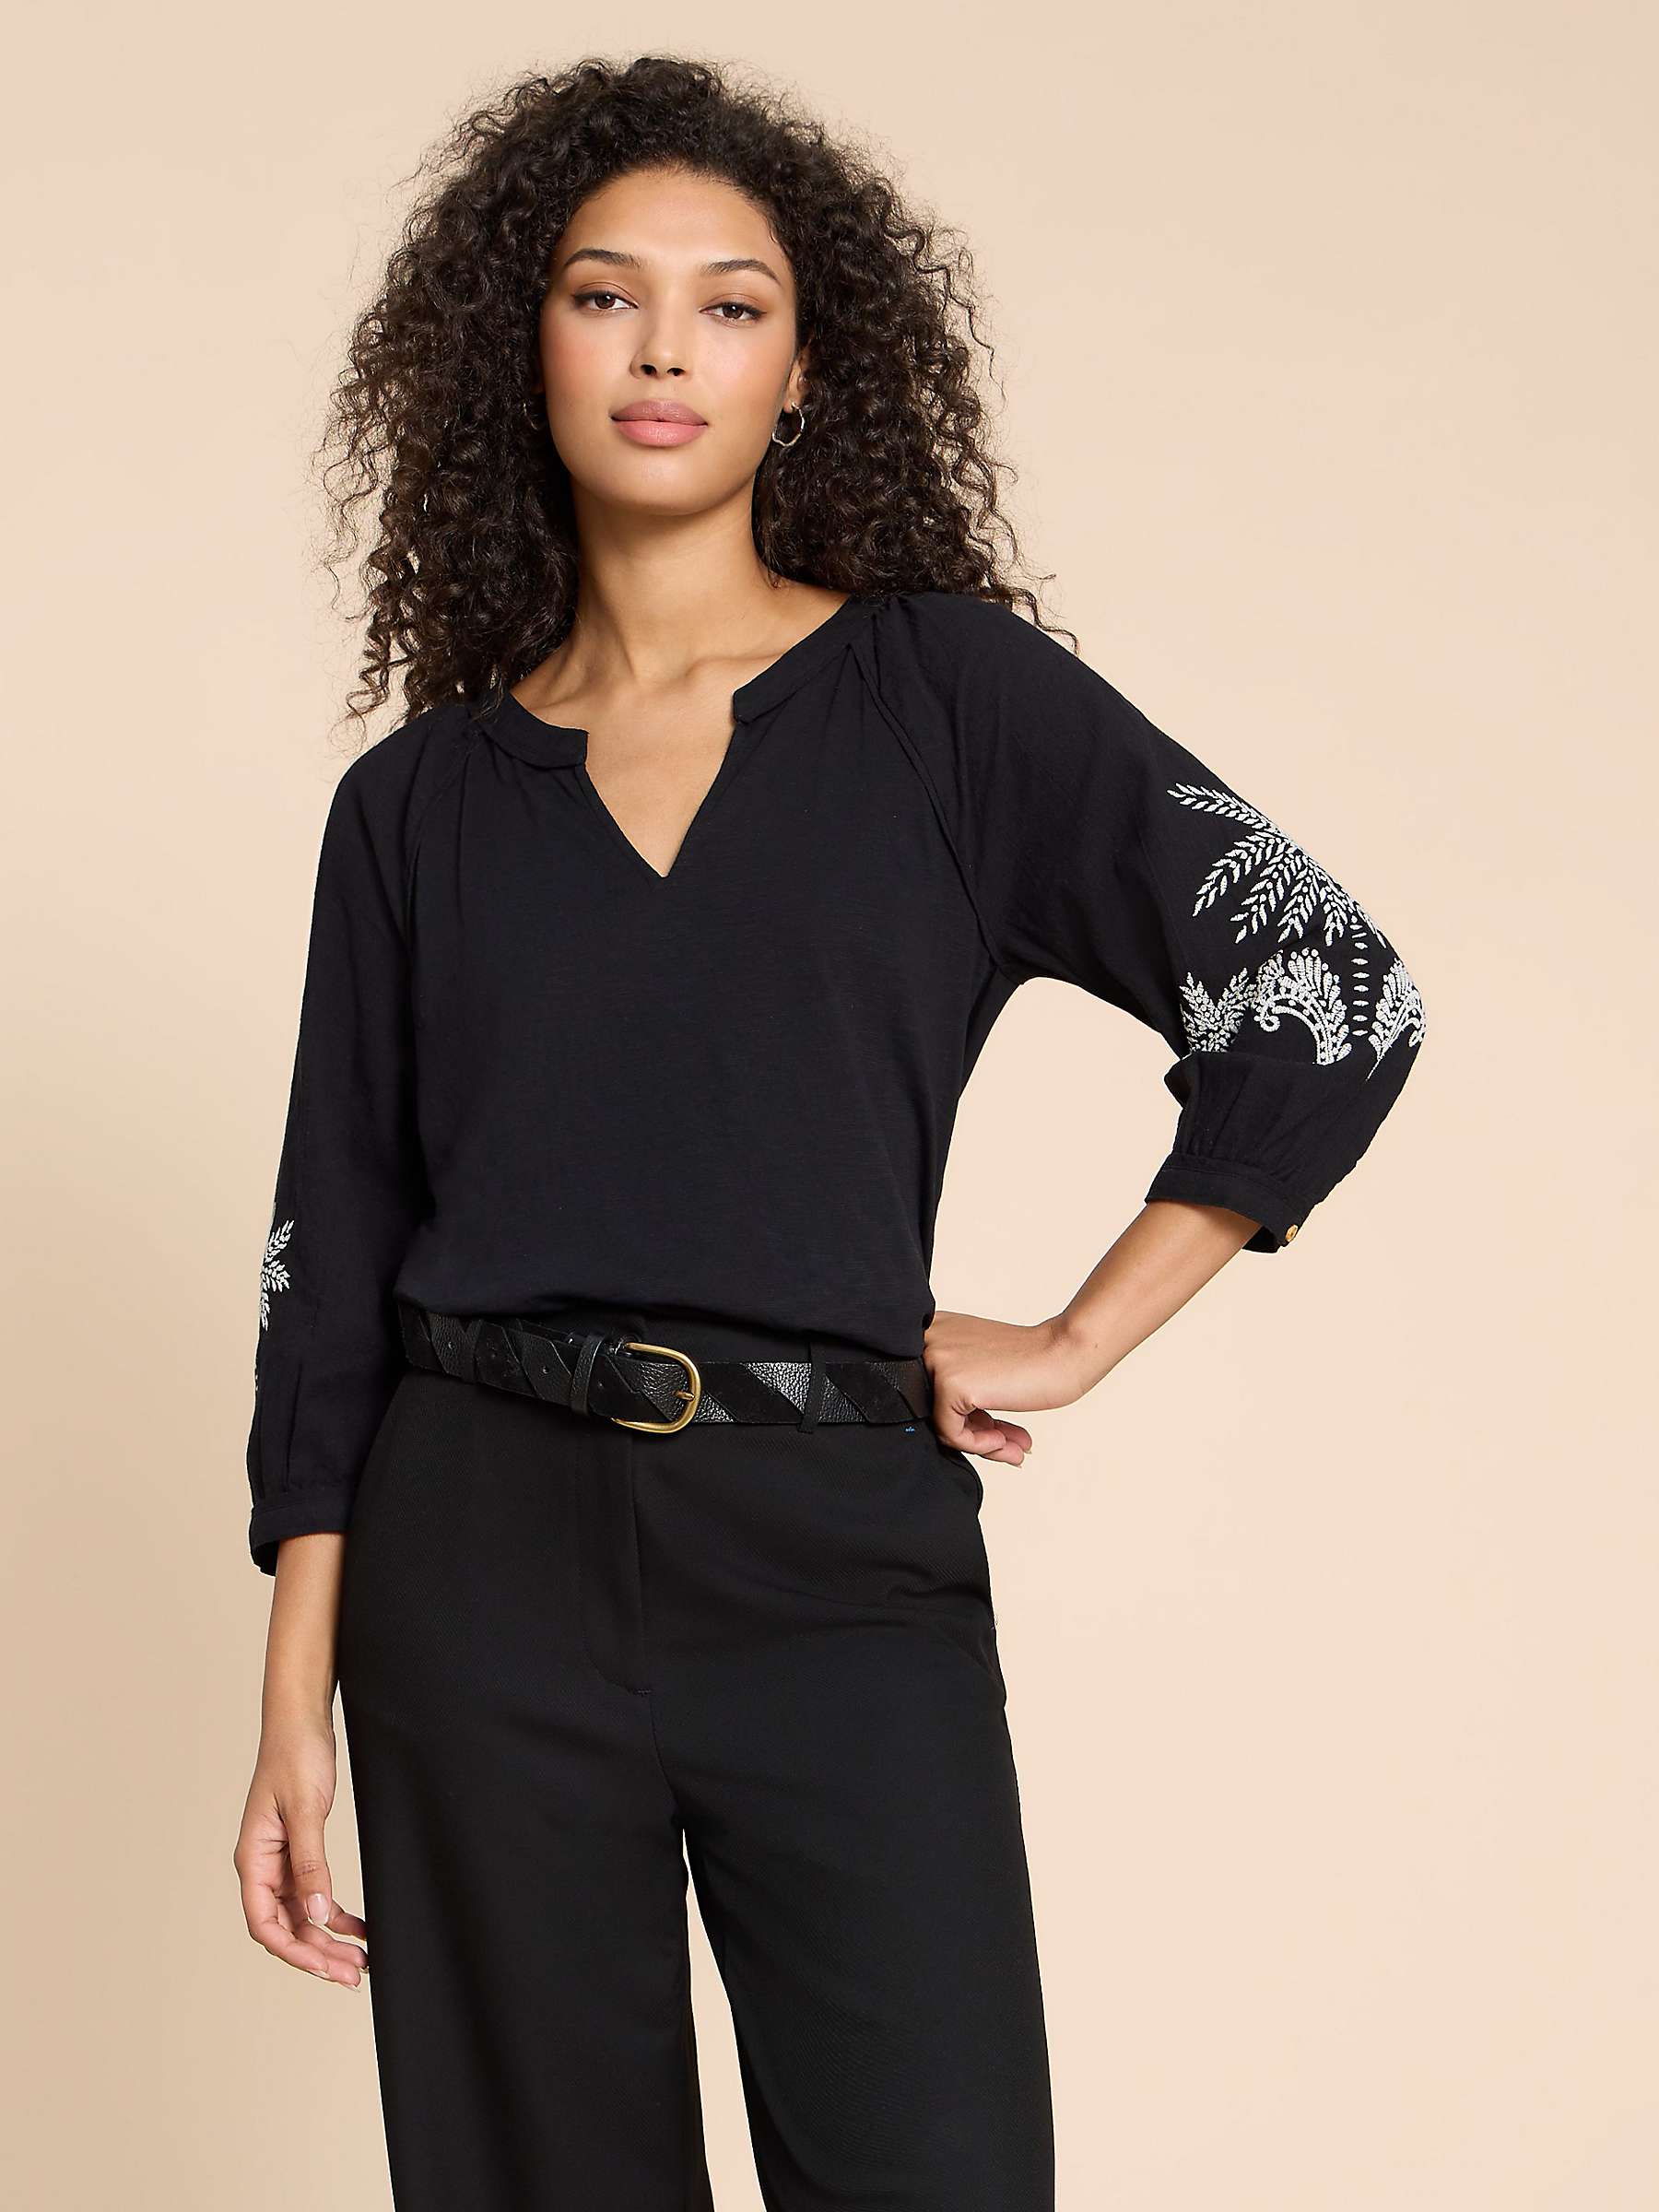 Buy White Stuff Millie Embroidered Sleeve Top, Black/Multi Online at johnlewis.com